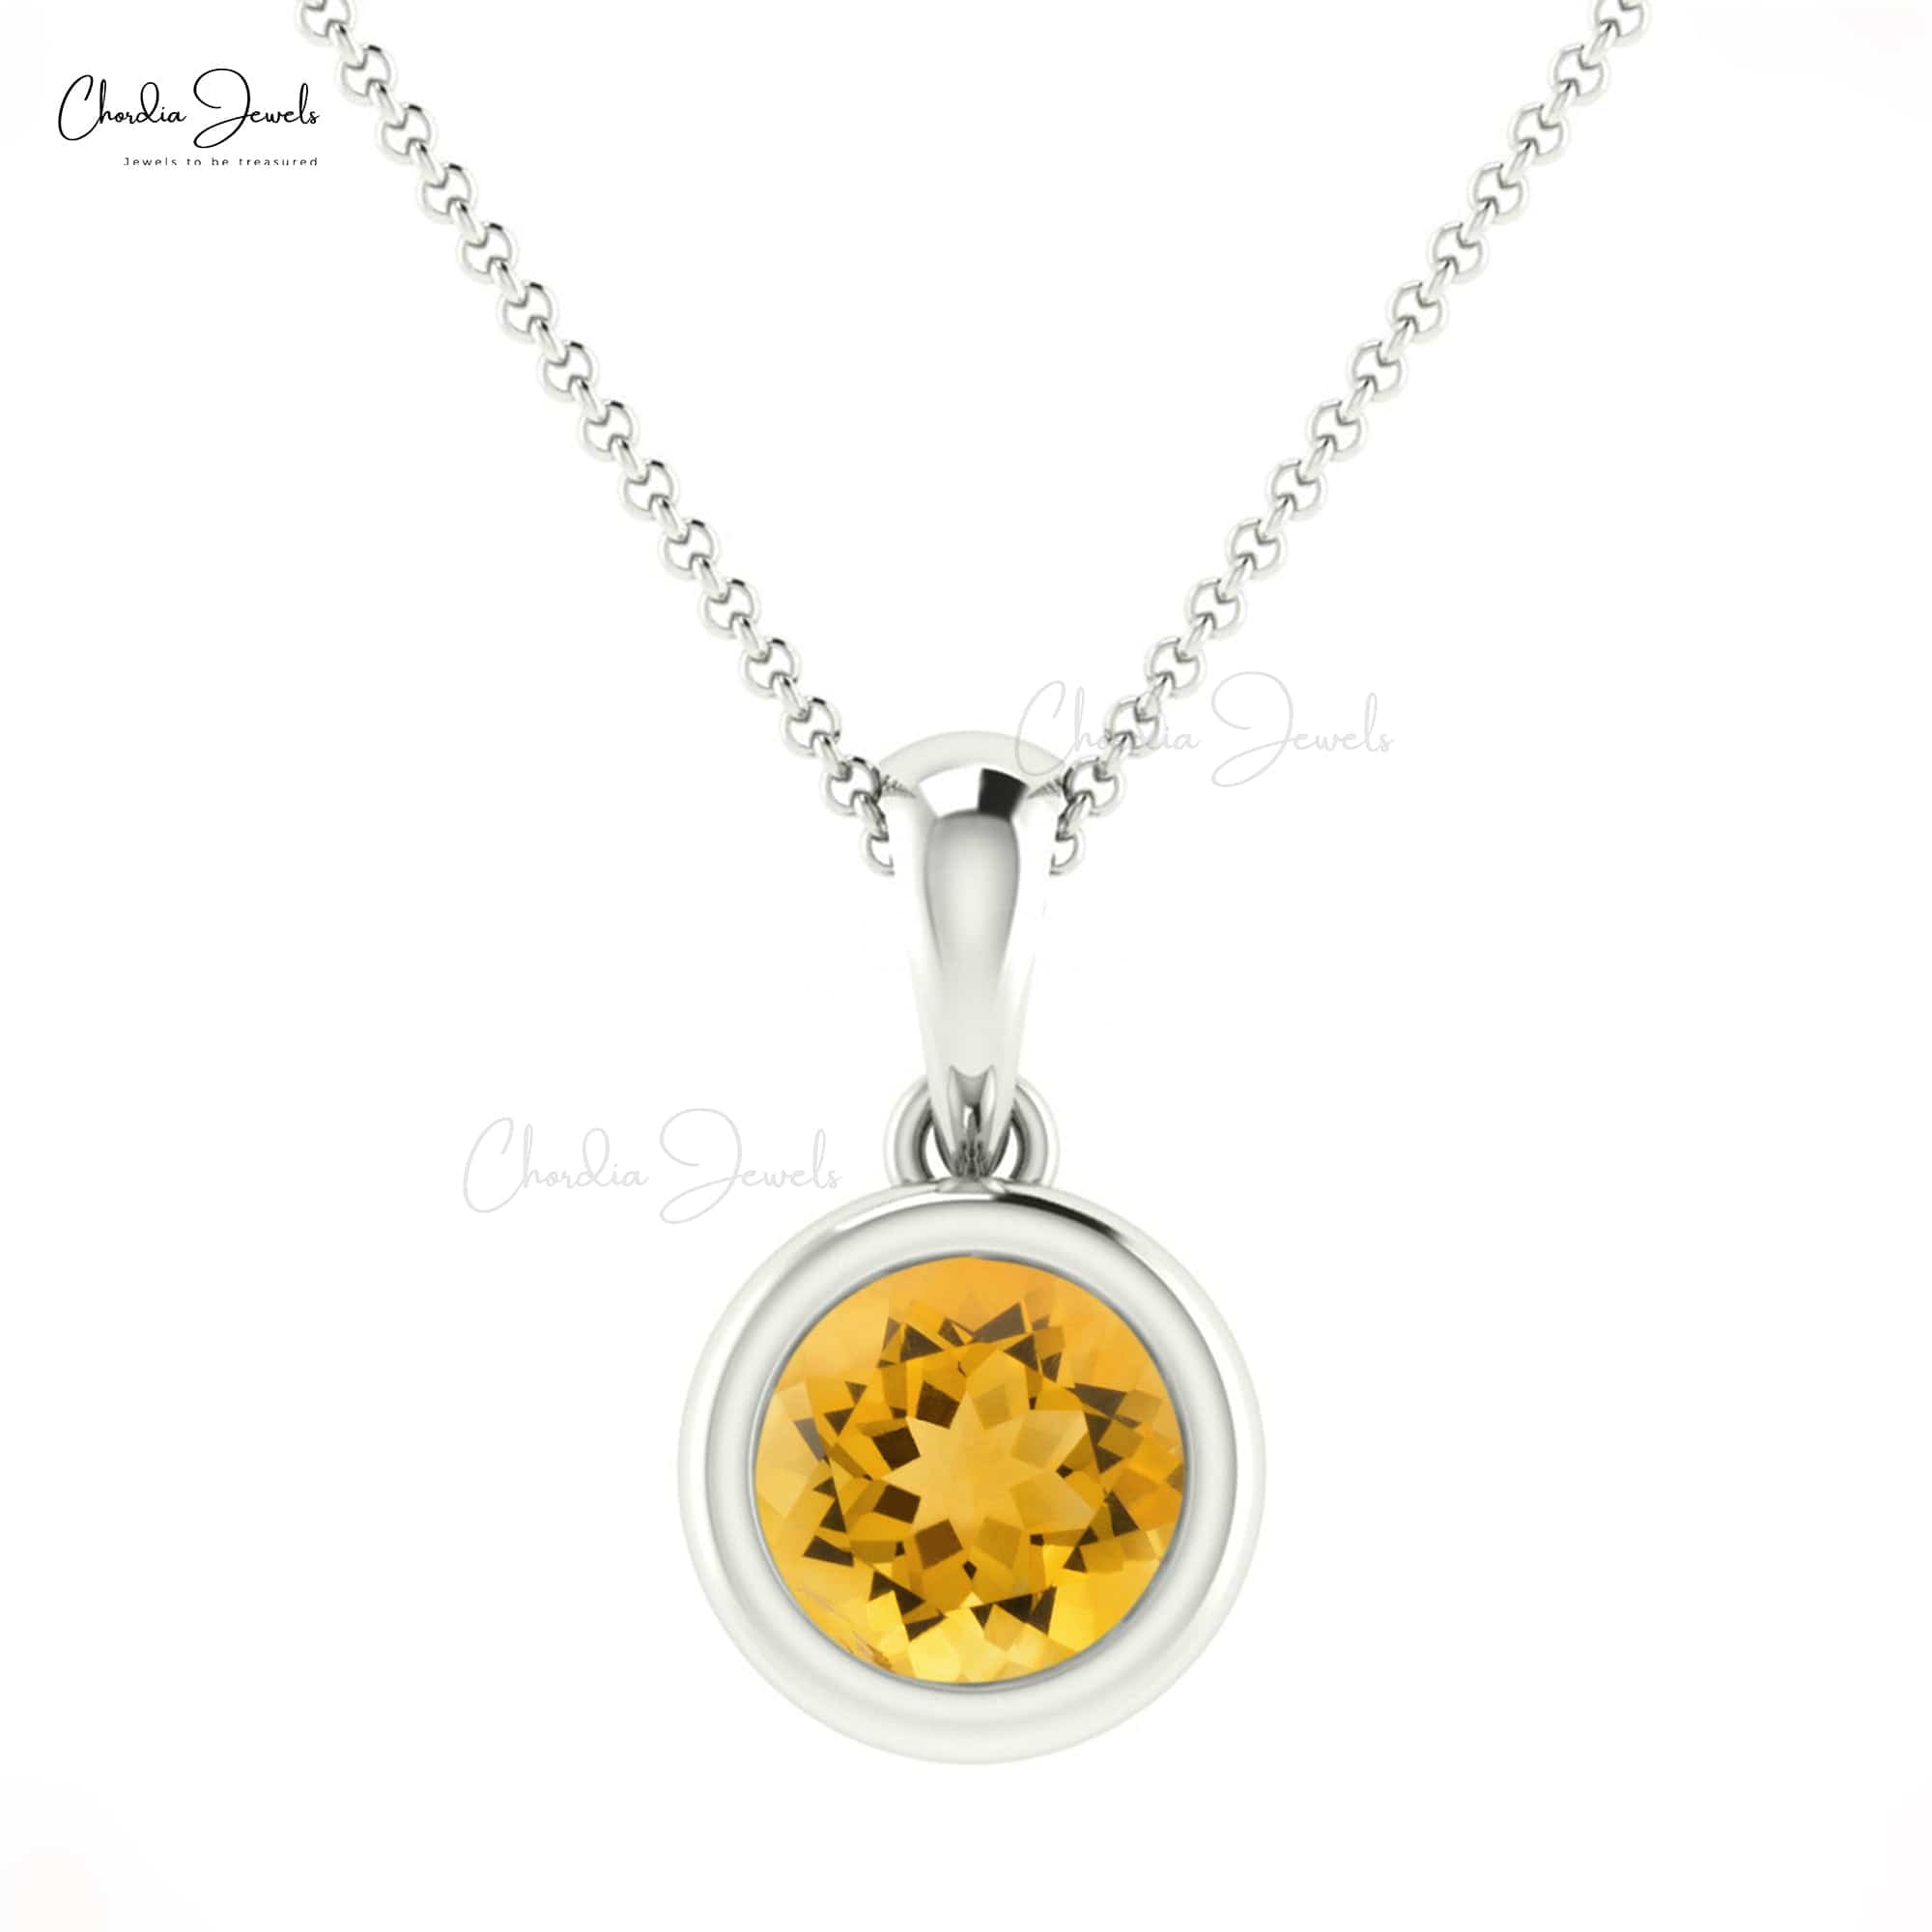 Gold Sunflower Charm Necklace - Pretty Much Store